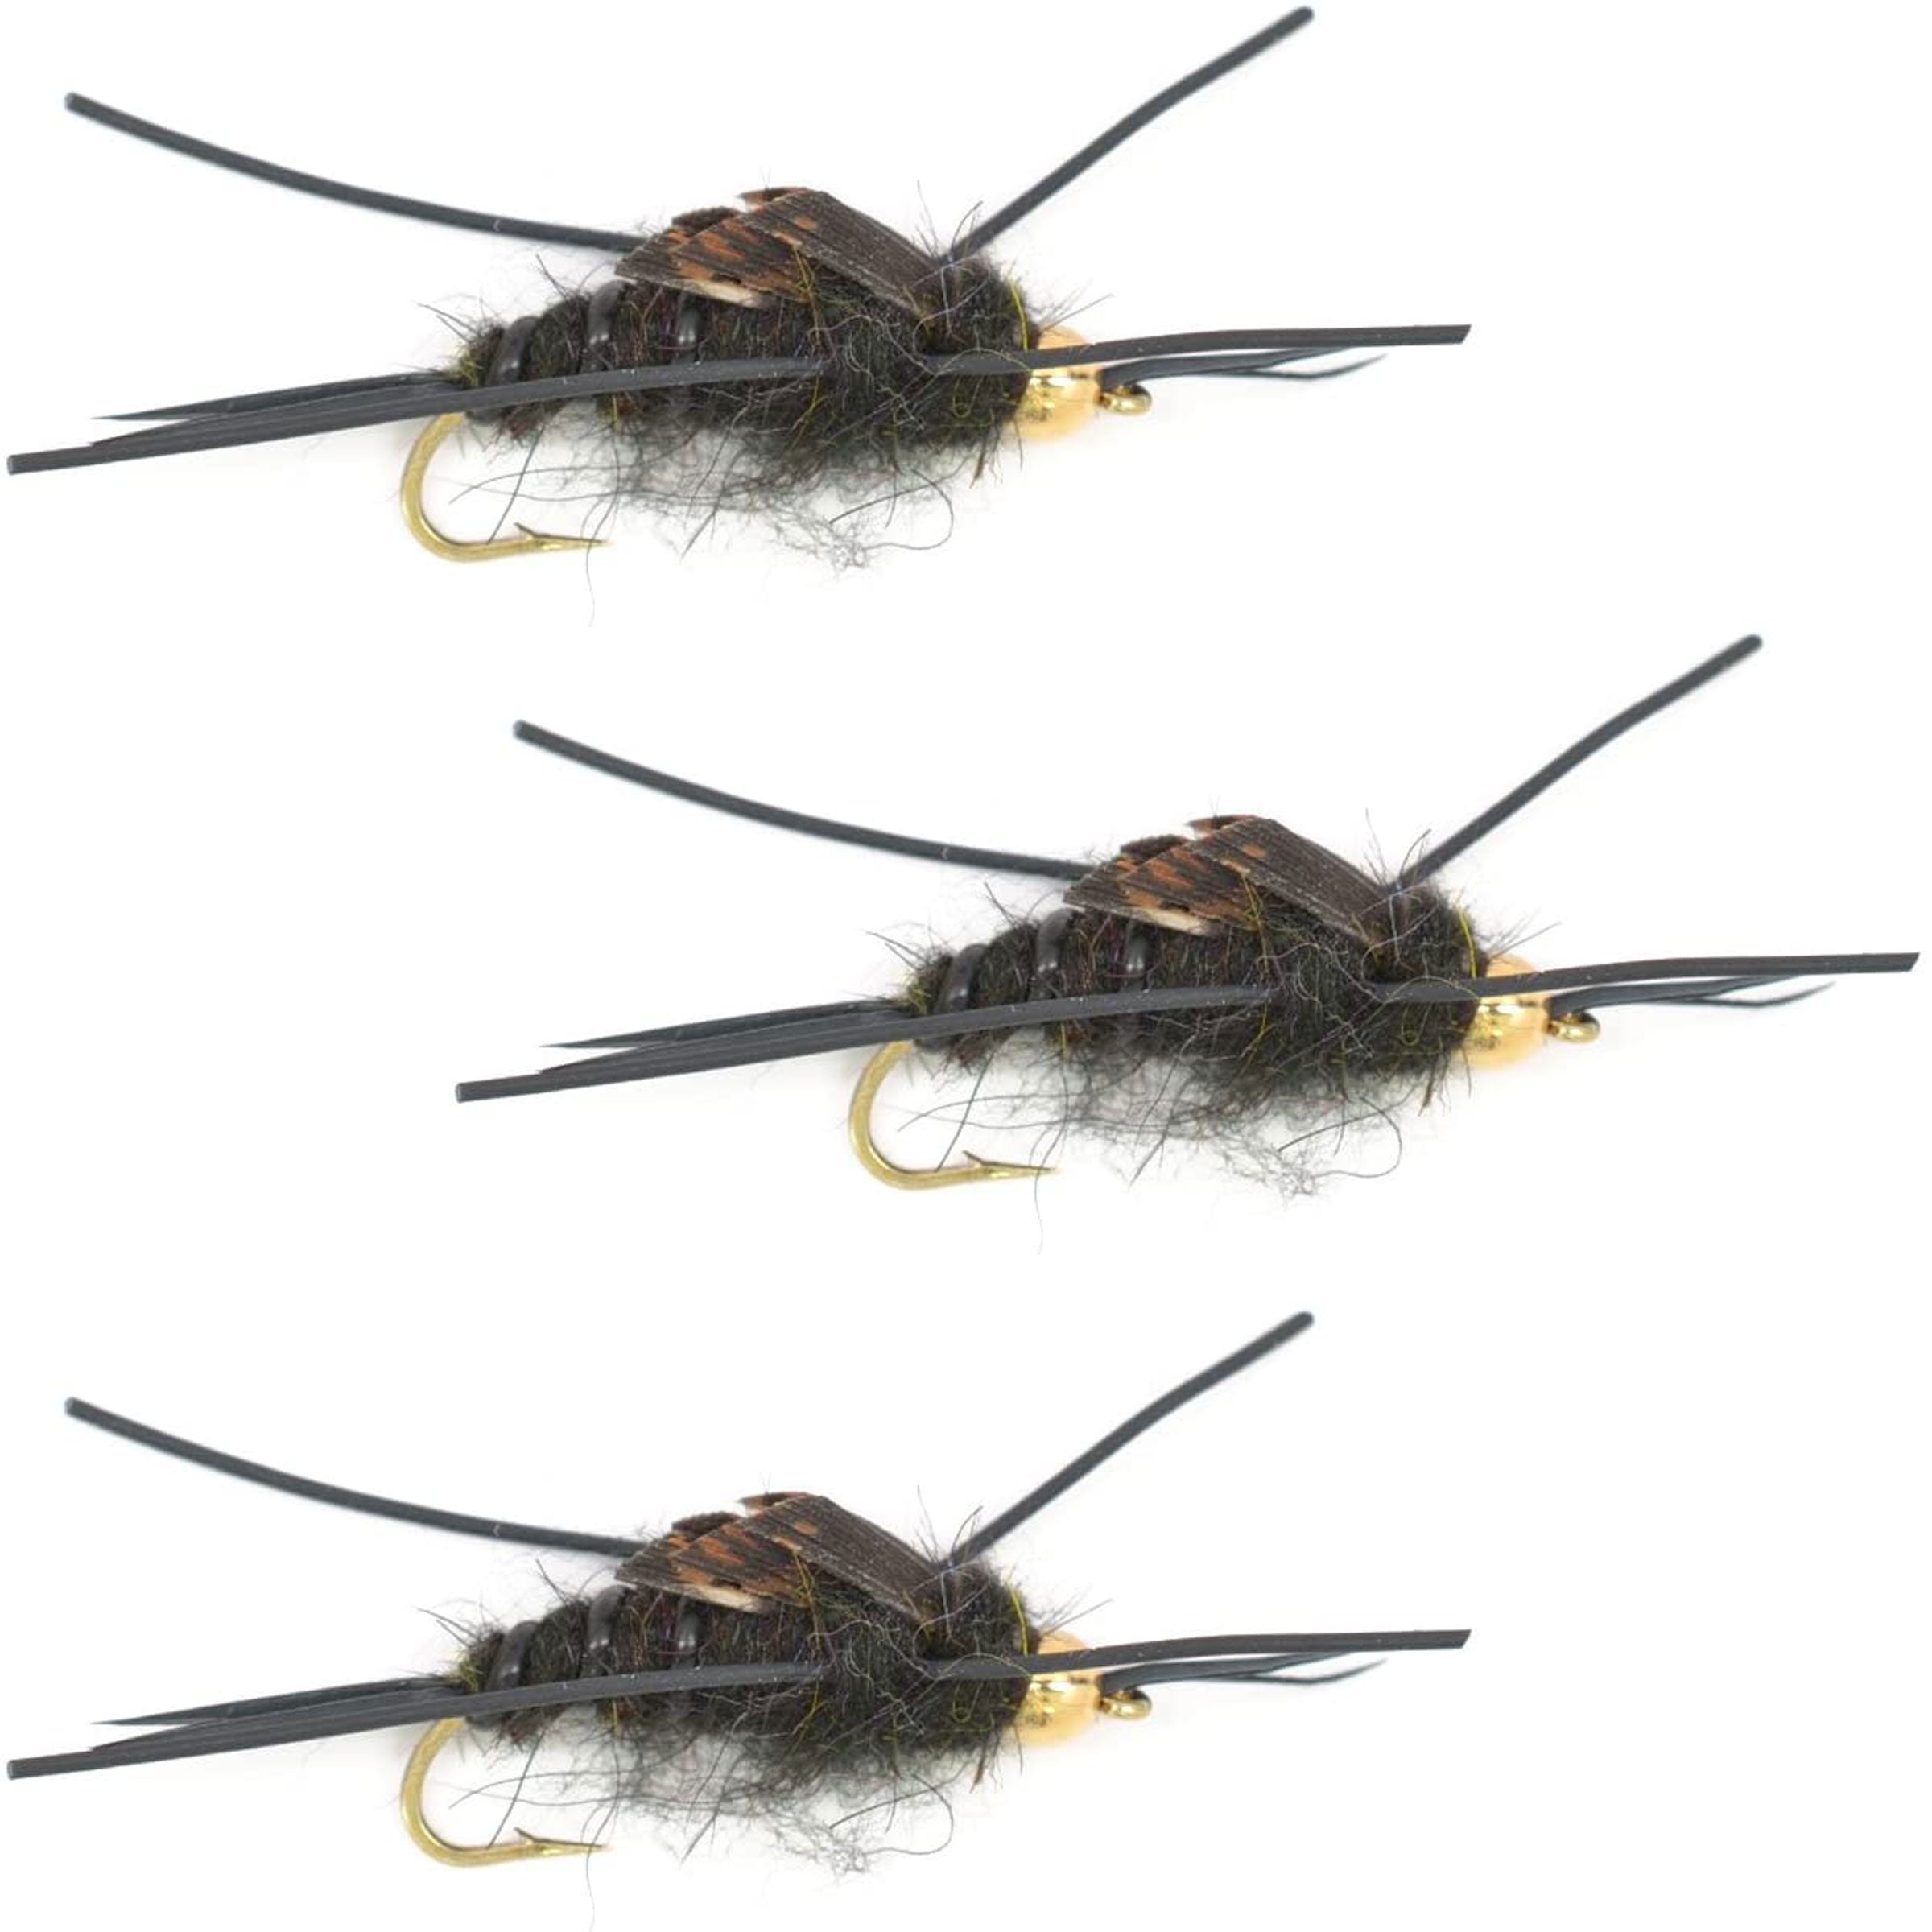 3 Pack Gold Bead Kaufmann's Black Stone Fly with Rubber Legs - Stonefly Wet Fly - Hook Size 4